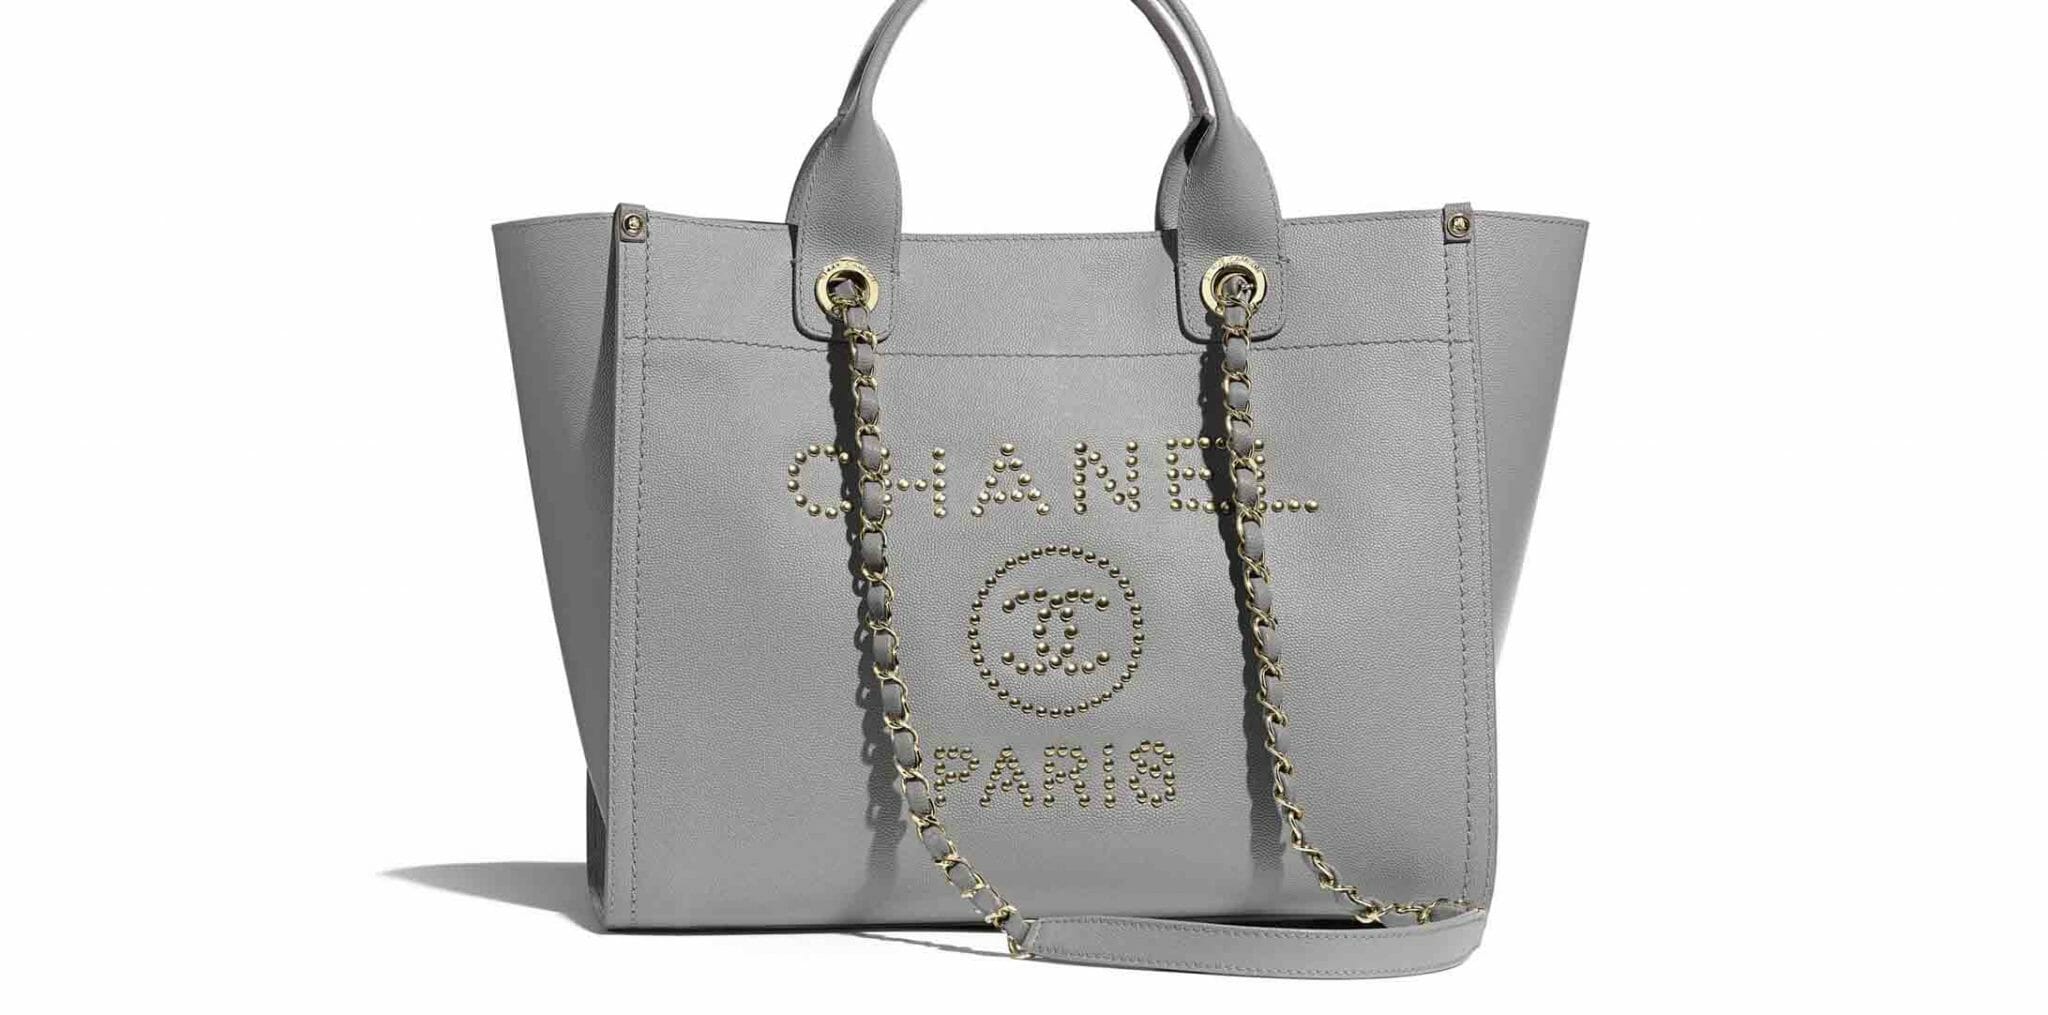 The Complete Guide to the Chanel Deauville Tote Bag Handbagholic